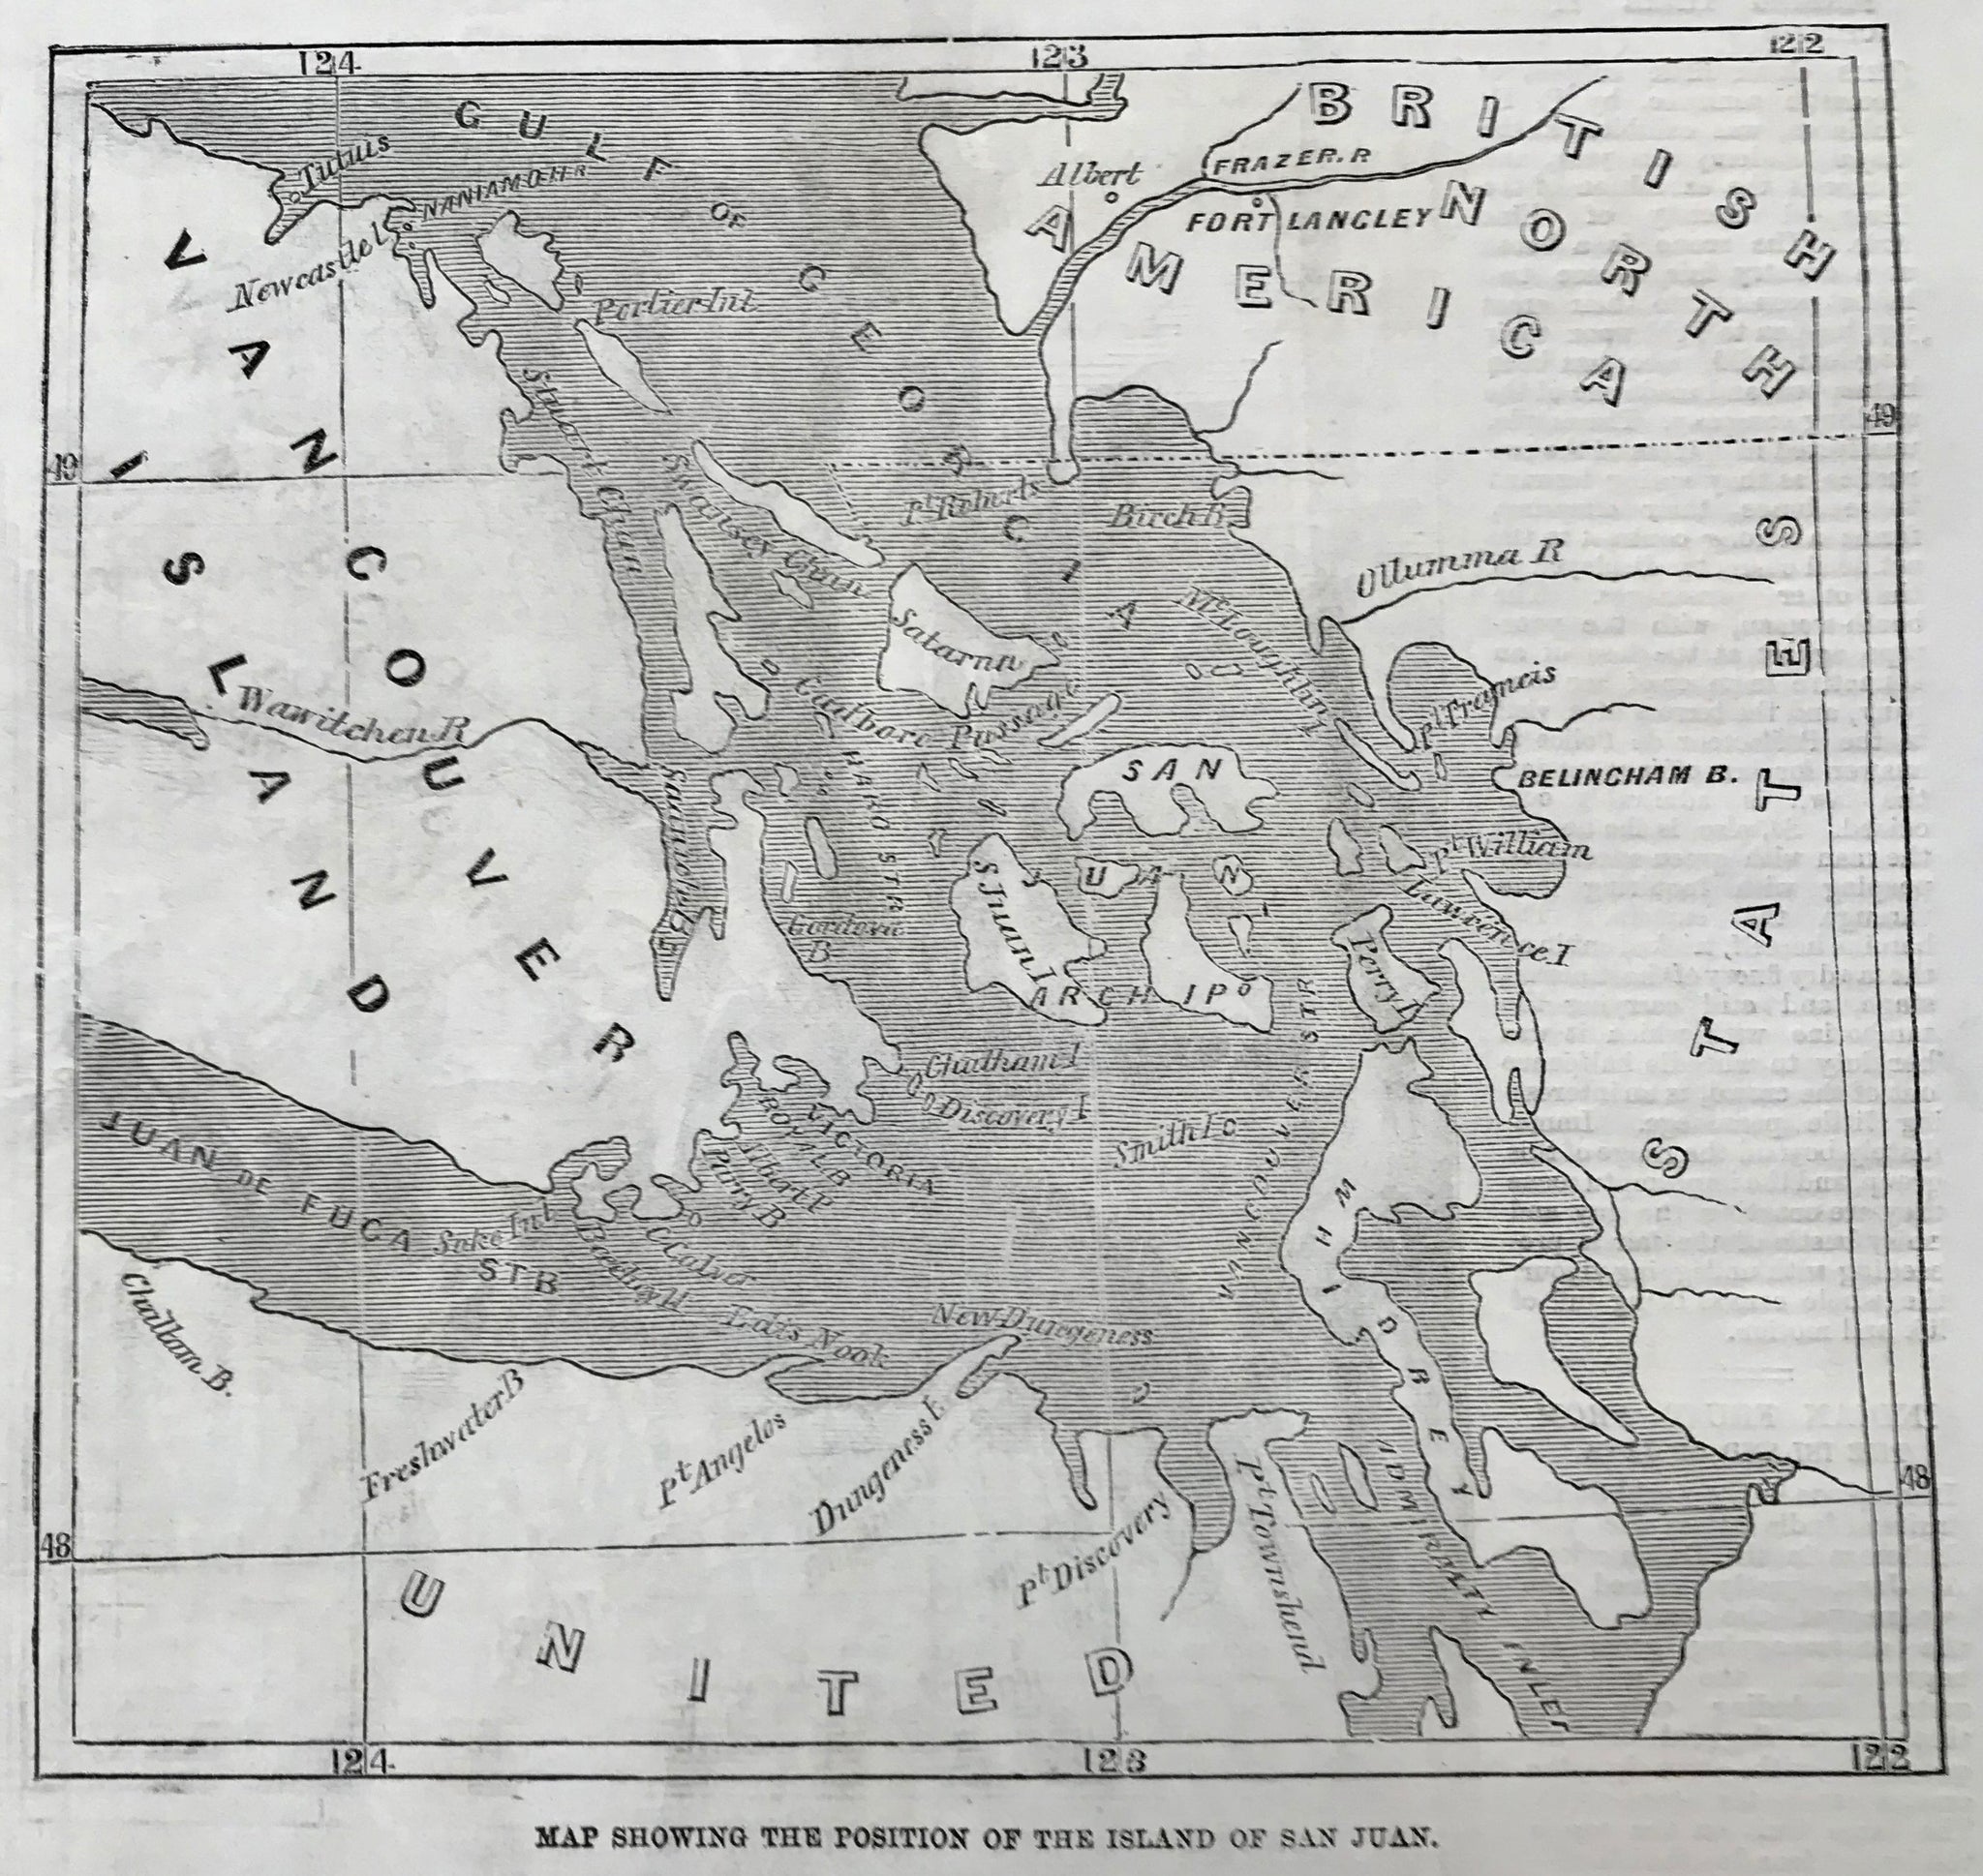 "Map Showing the Portion of San Juan Island"  Wood engraving 1859, Below the image is a long article titled " The San Juan Difficulty" which describes the occupation of the American troops and the boundary problems between the United States and Great Britain.